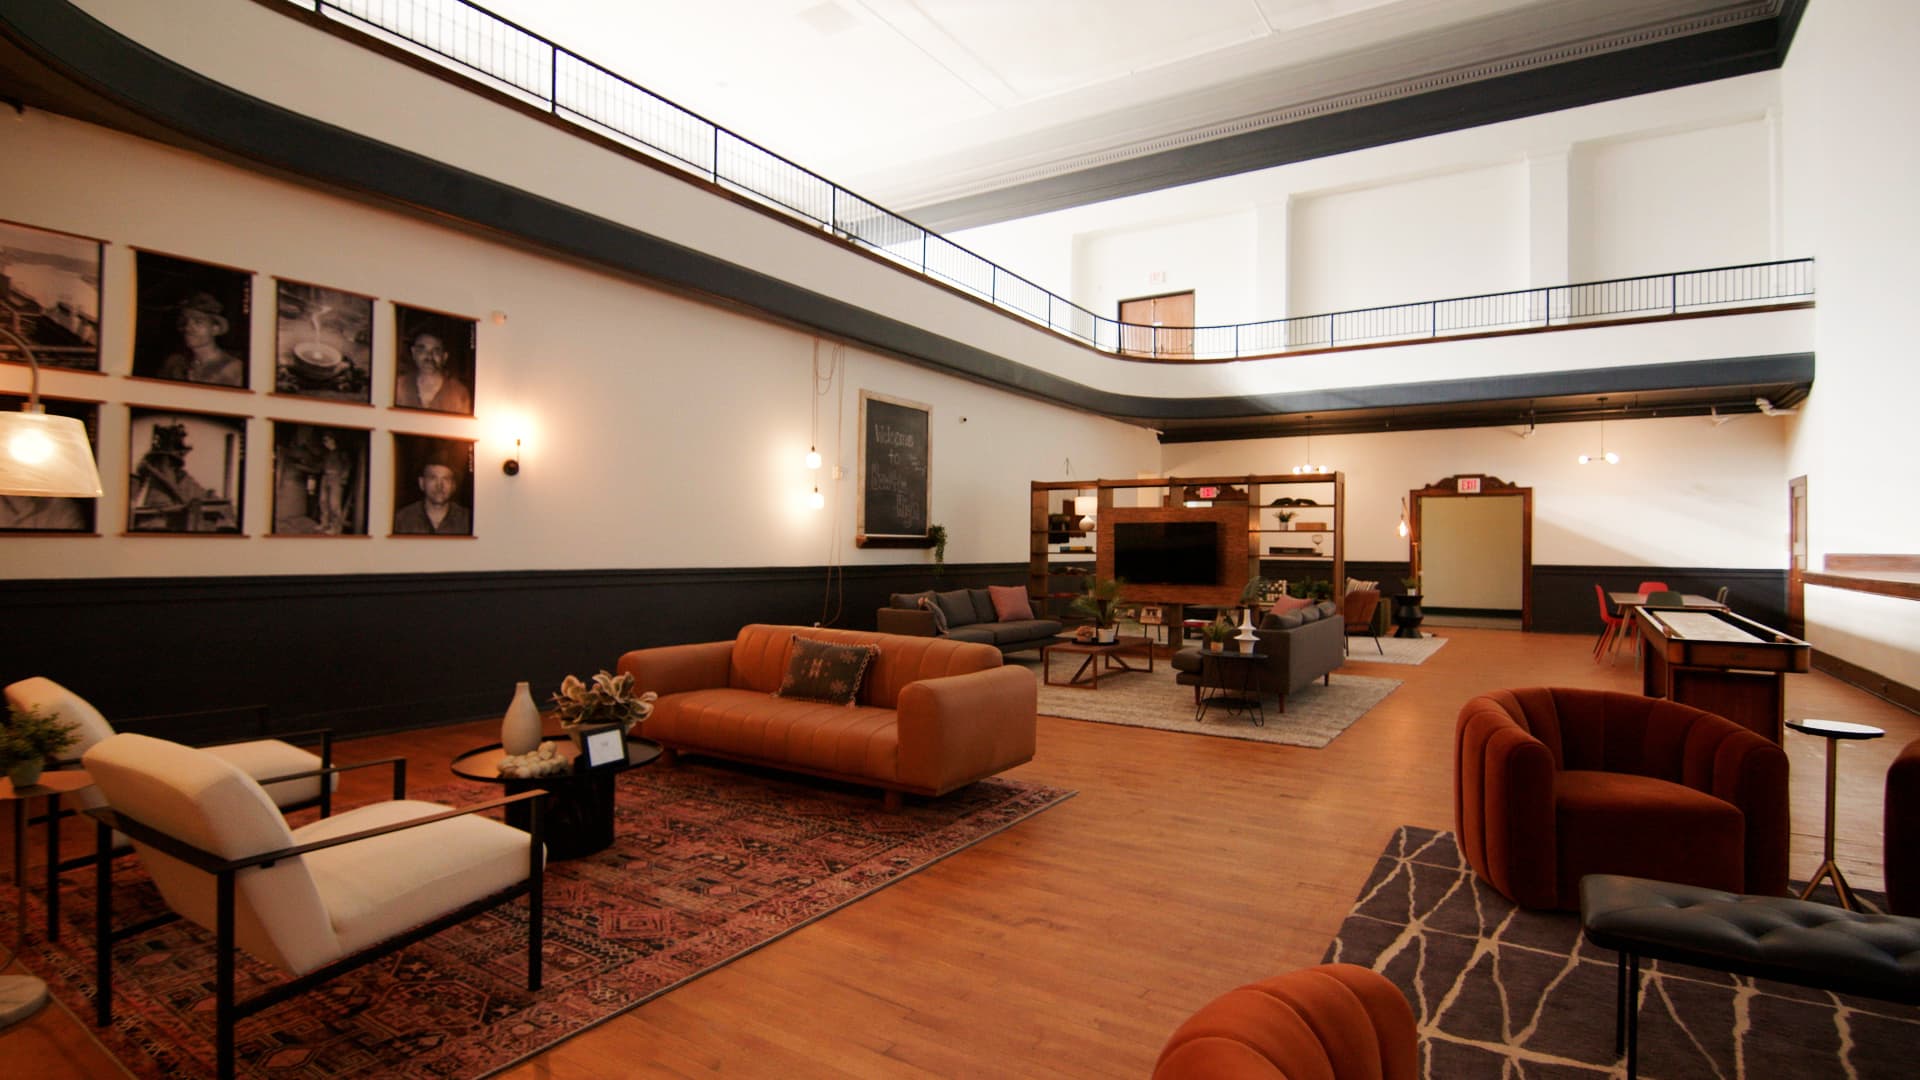 The partners converted the old high school's auditorium into a resident's lounge.